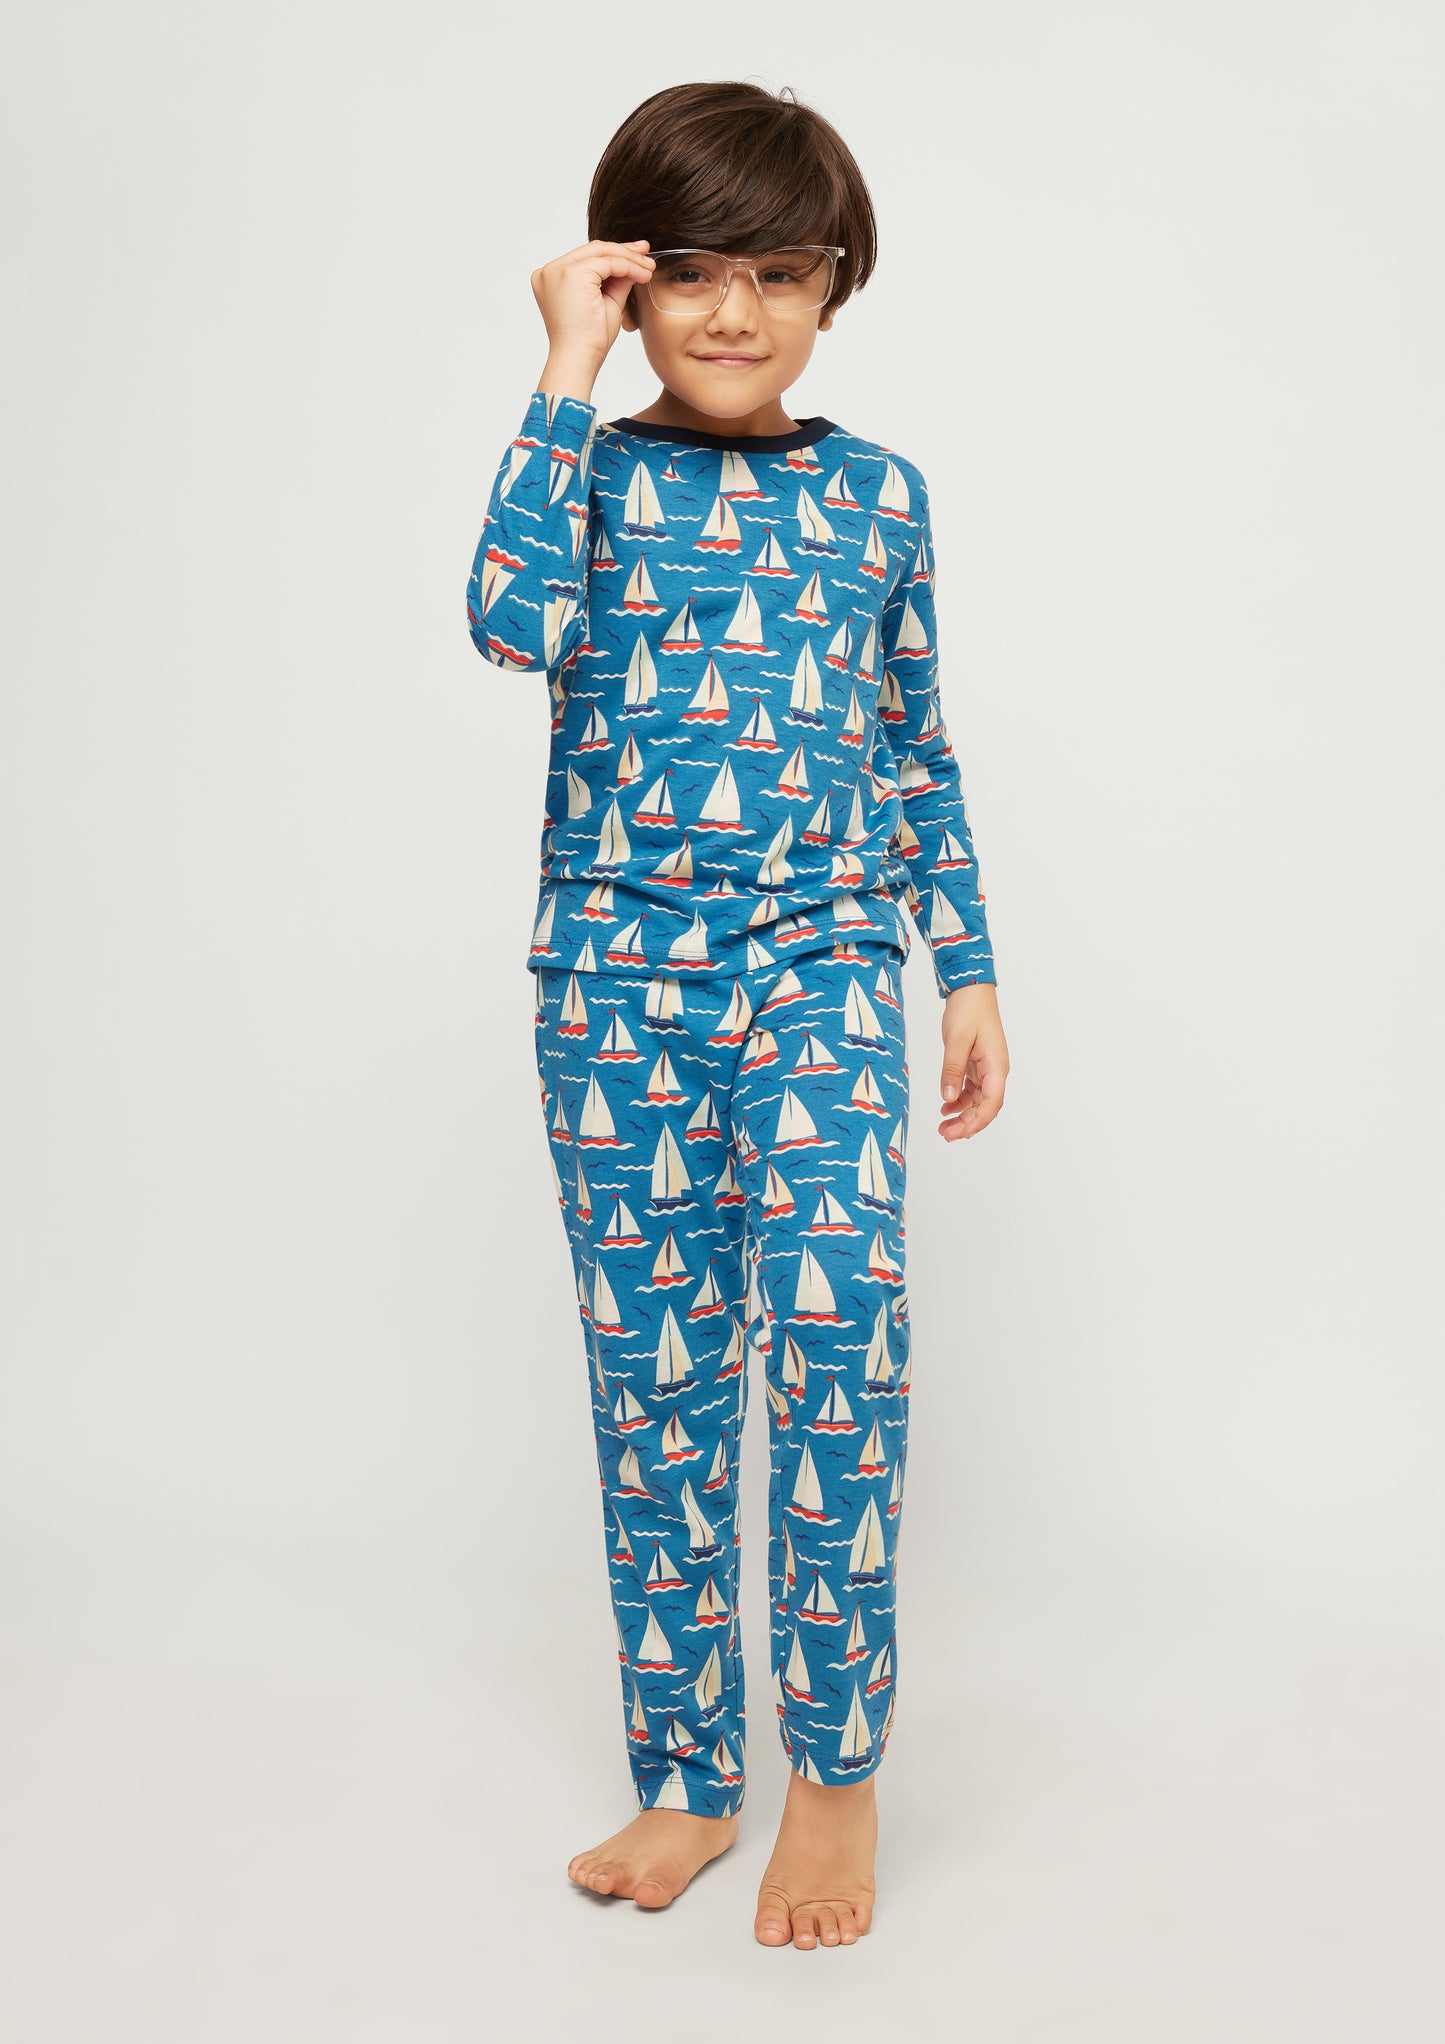 RED, WHITE AND BLUE BOAT PRINT LONG SLEEVE PAJAMA SET